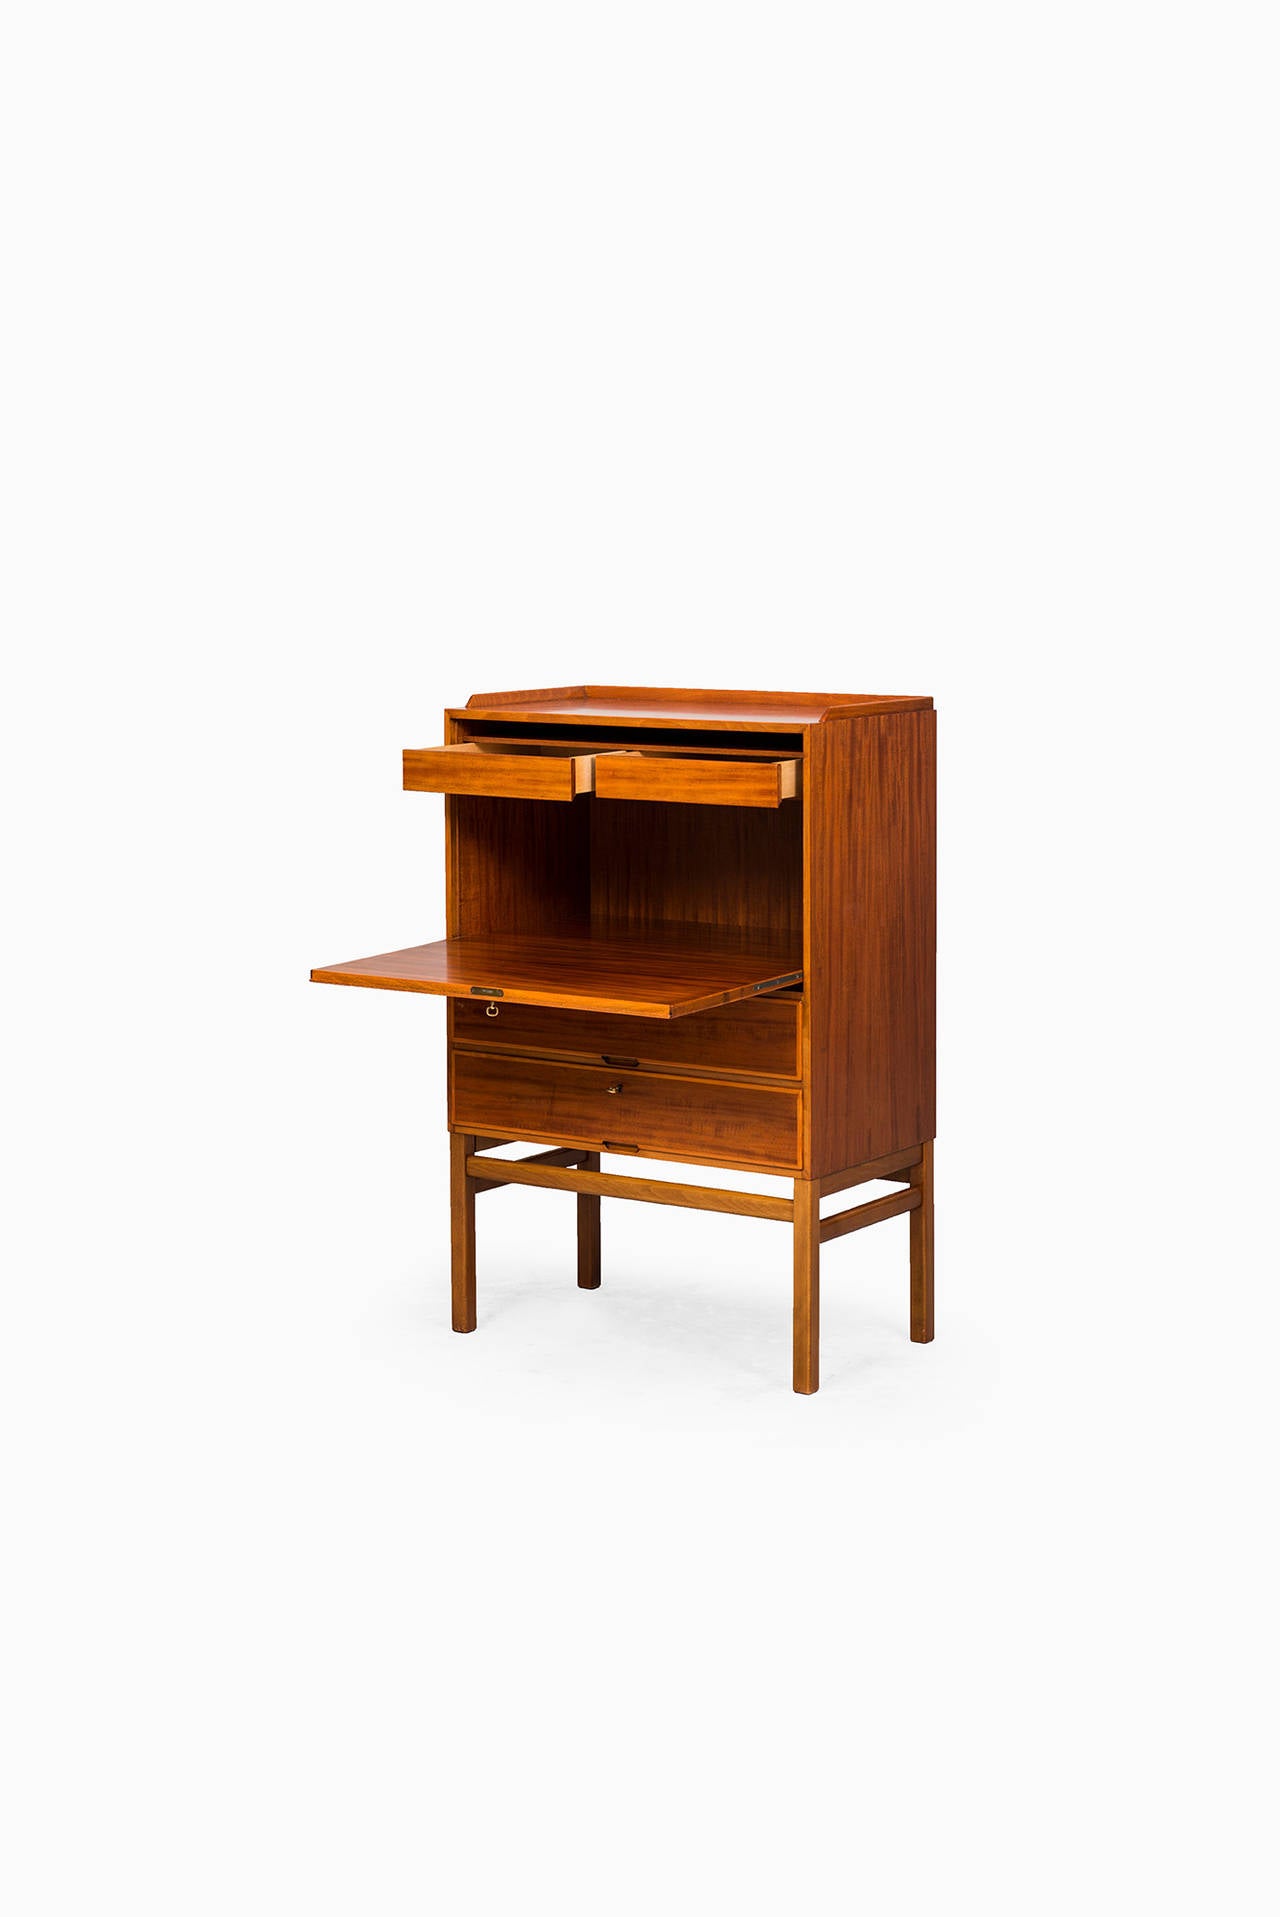 Axel Larsson cabinet / secretaire in mahogany by Bodafors in Sweden 3